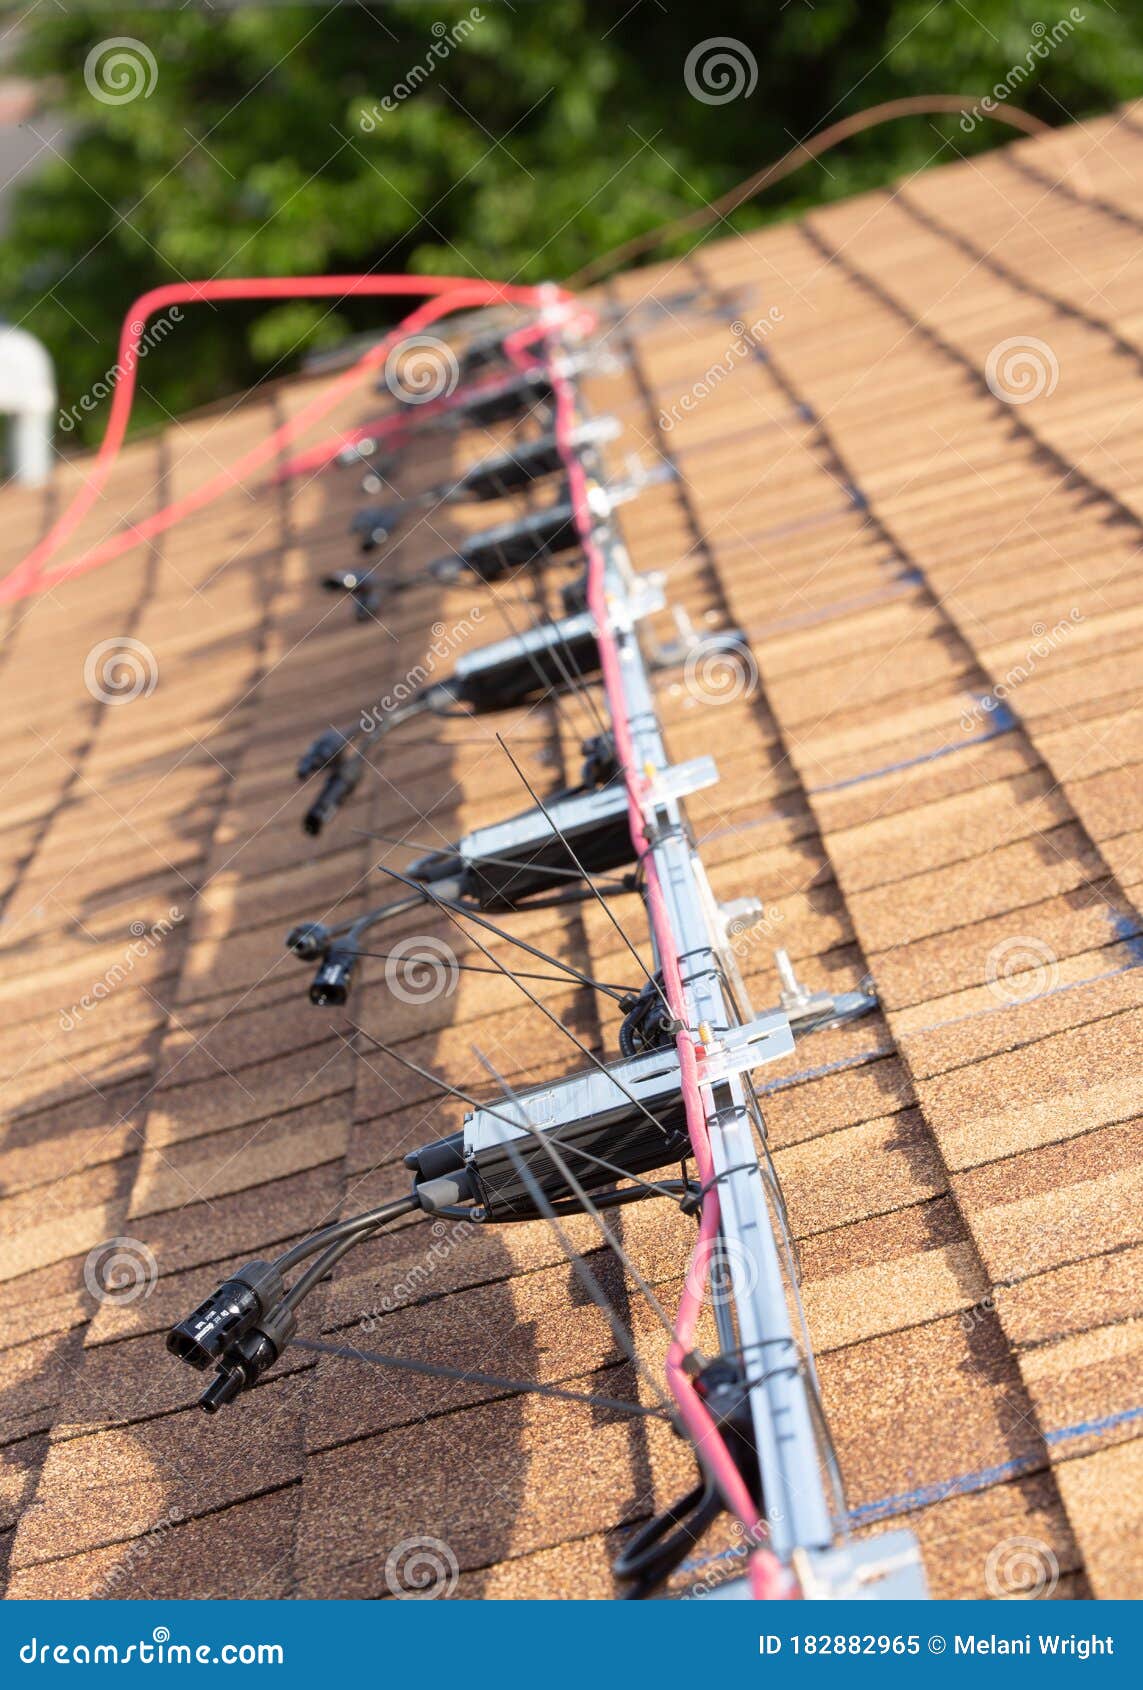 Rails And Wiring For Solar Panels Stock Image Image of electricity, connecting 182882965